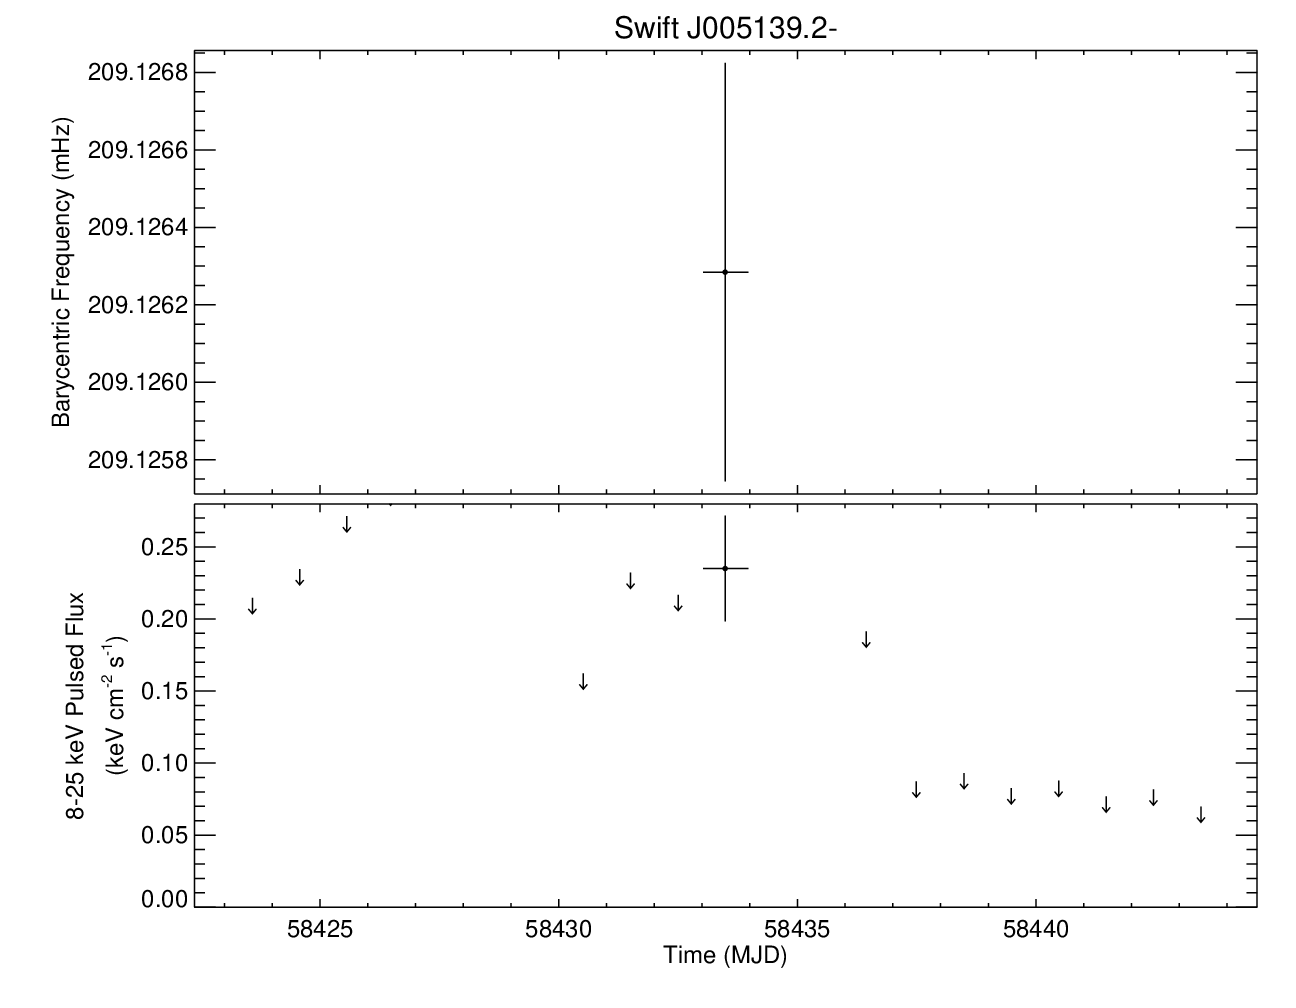 Swift J005139.2-721704 Short Frequency History